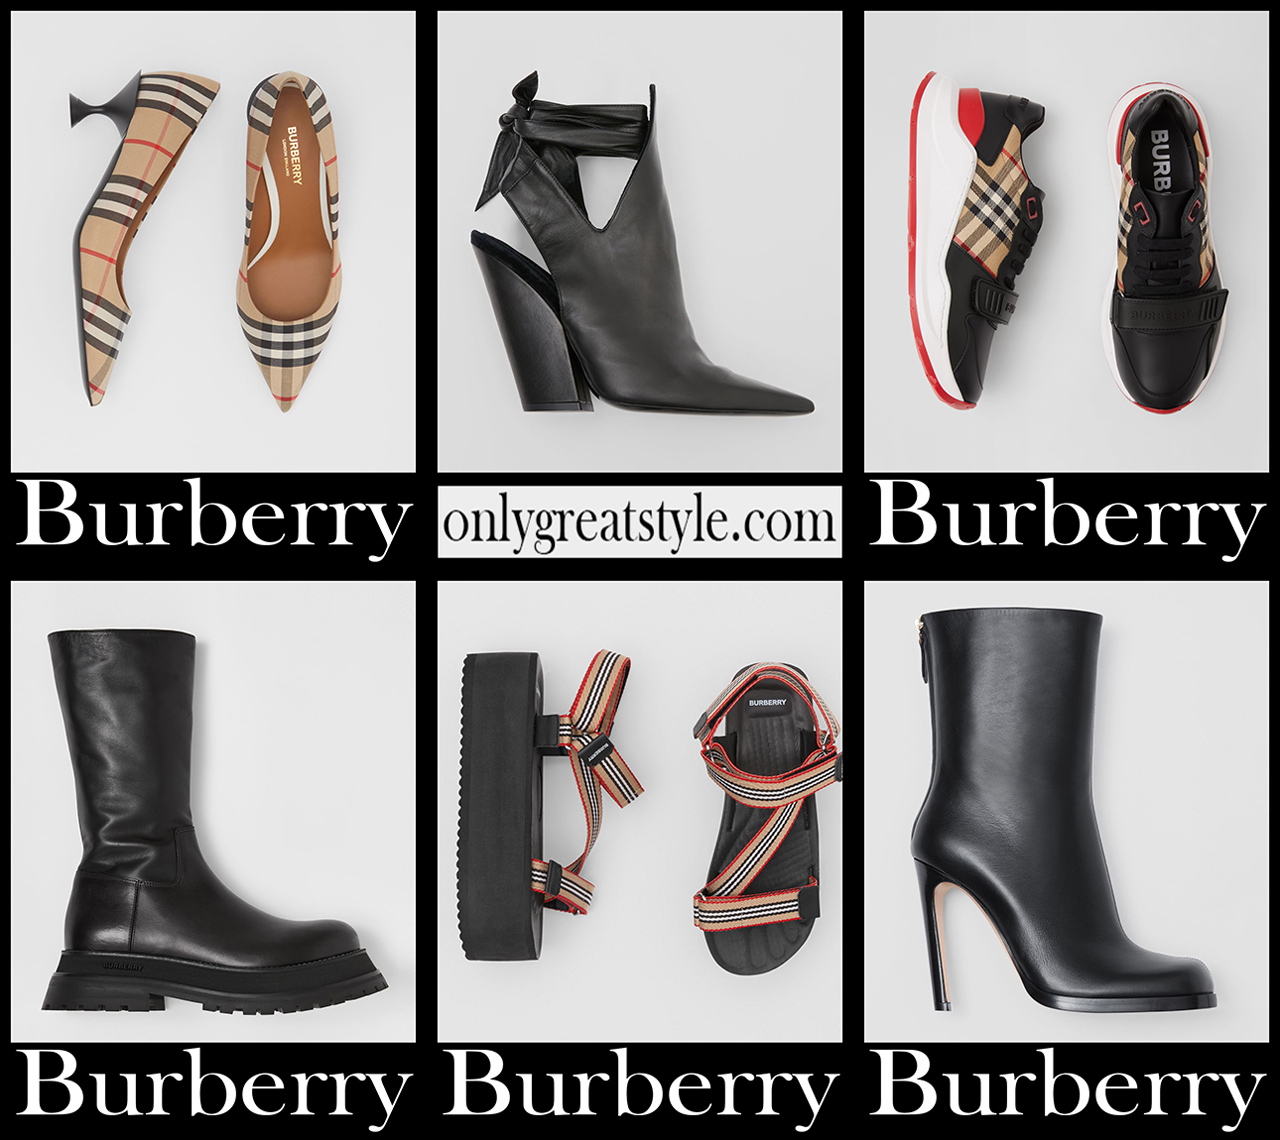 Burberry shoes 2021 new arrivals womens footwear